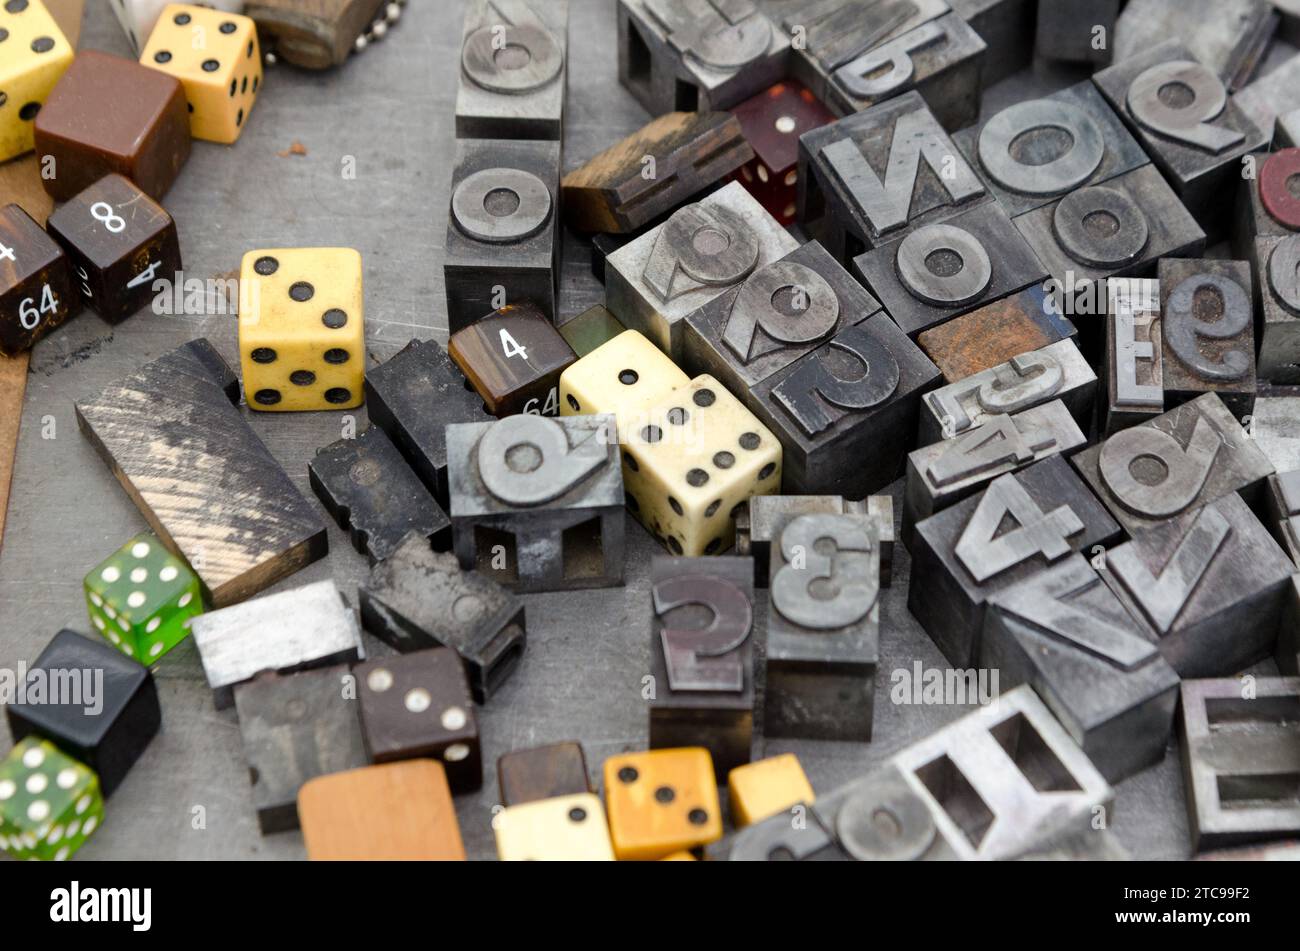 Dice for sale at Hells Kitchen flea market in New York City Stock Photo